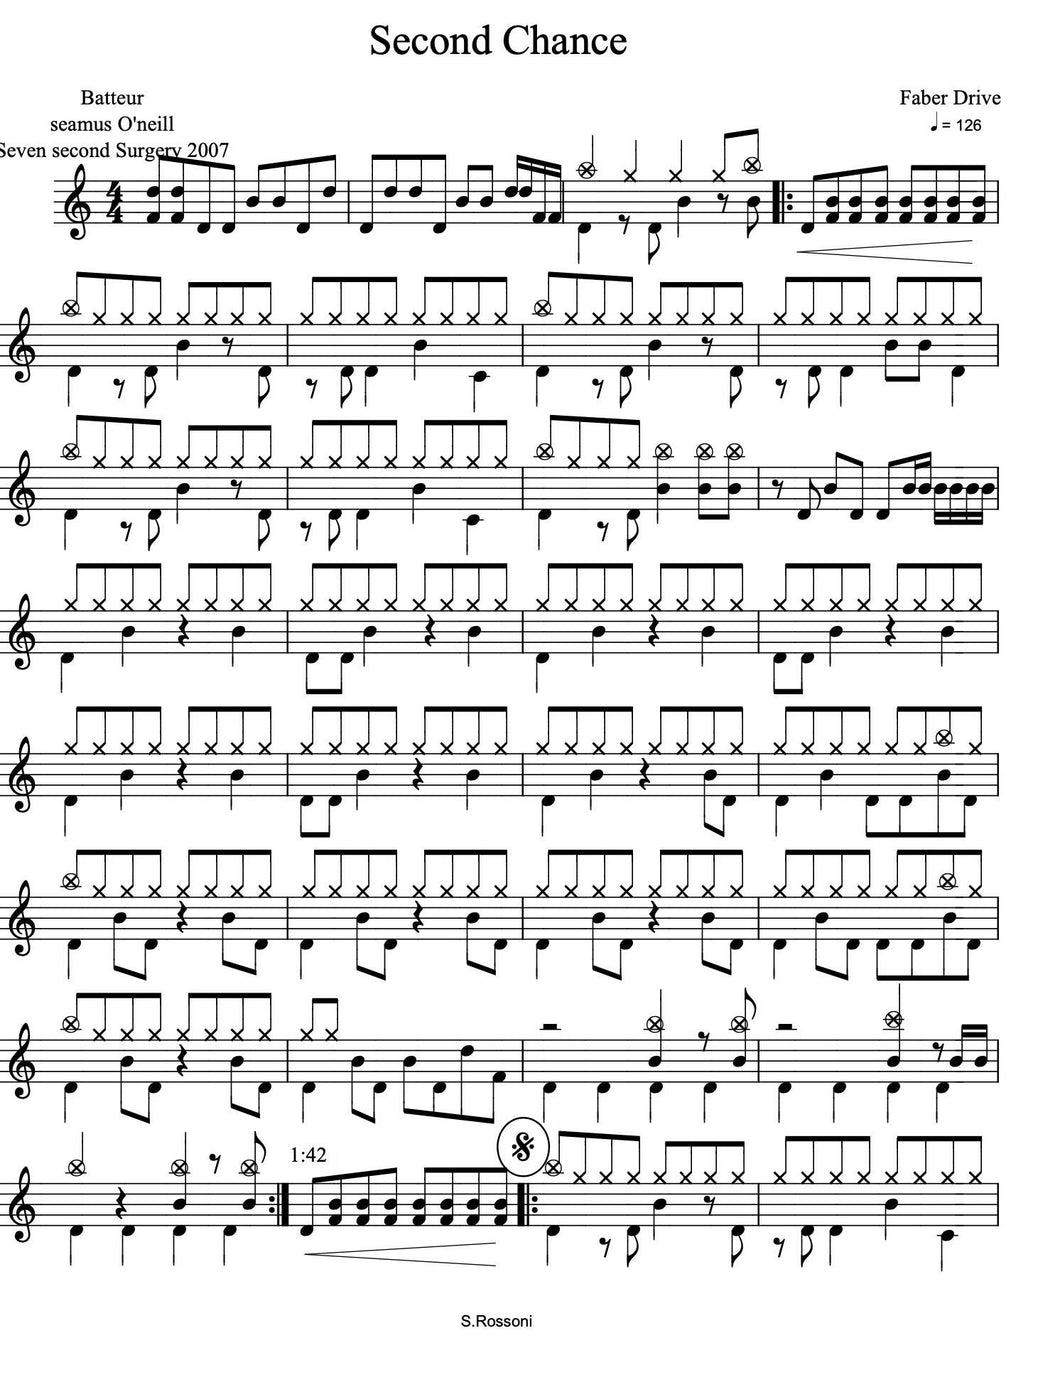 Second Chance - Faber Drive - Full Drum Transcription / Drum Sheet Music - Rossoni